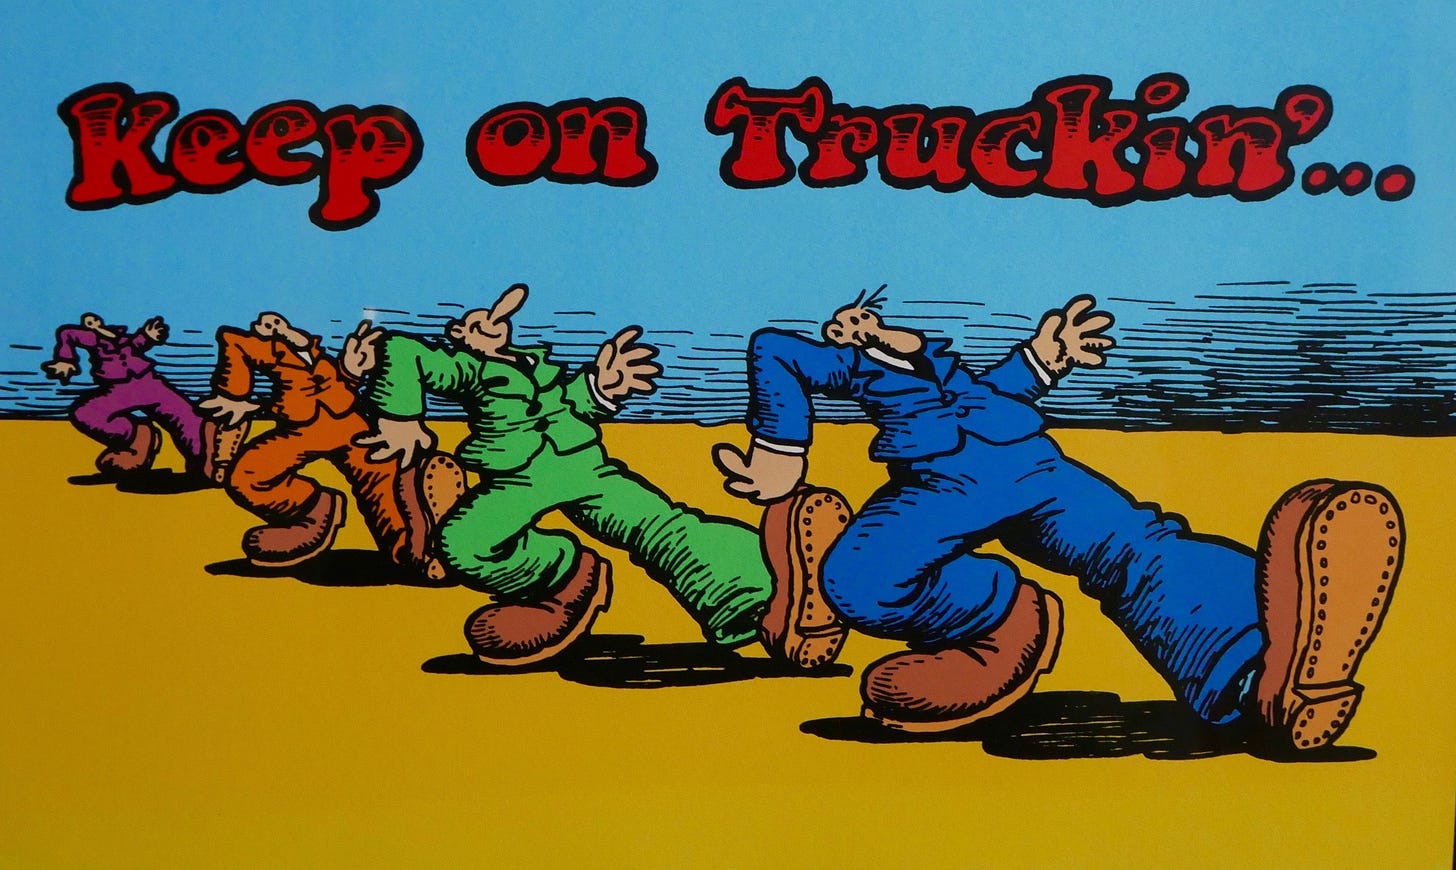 A drawing by R. Crumb entitled "Keep On Truckin'"